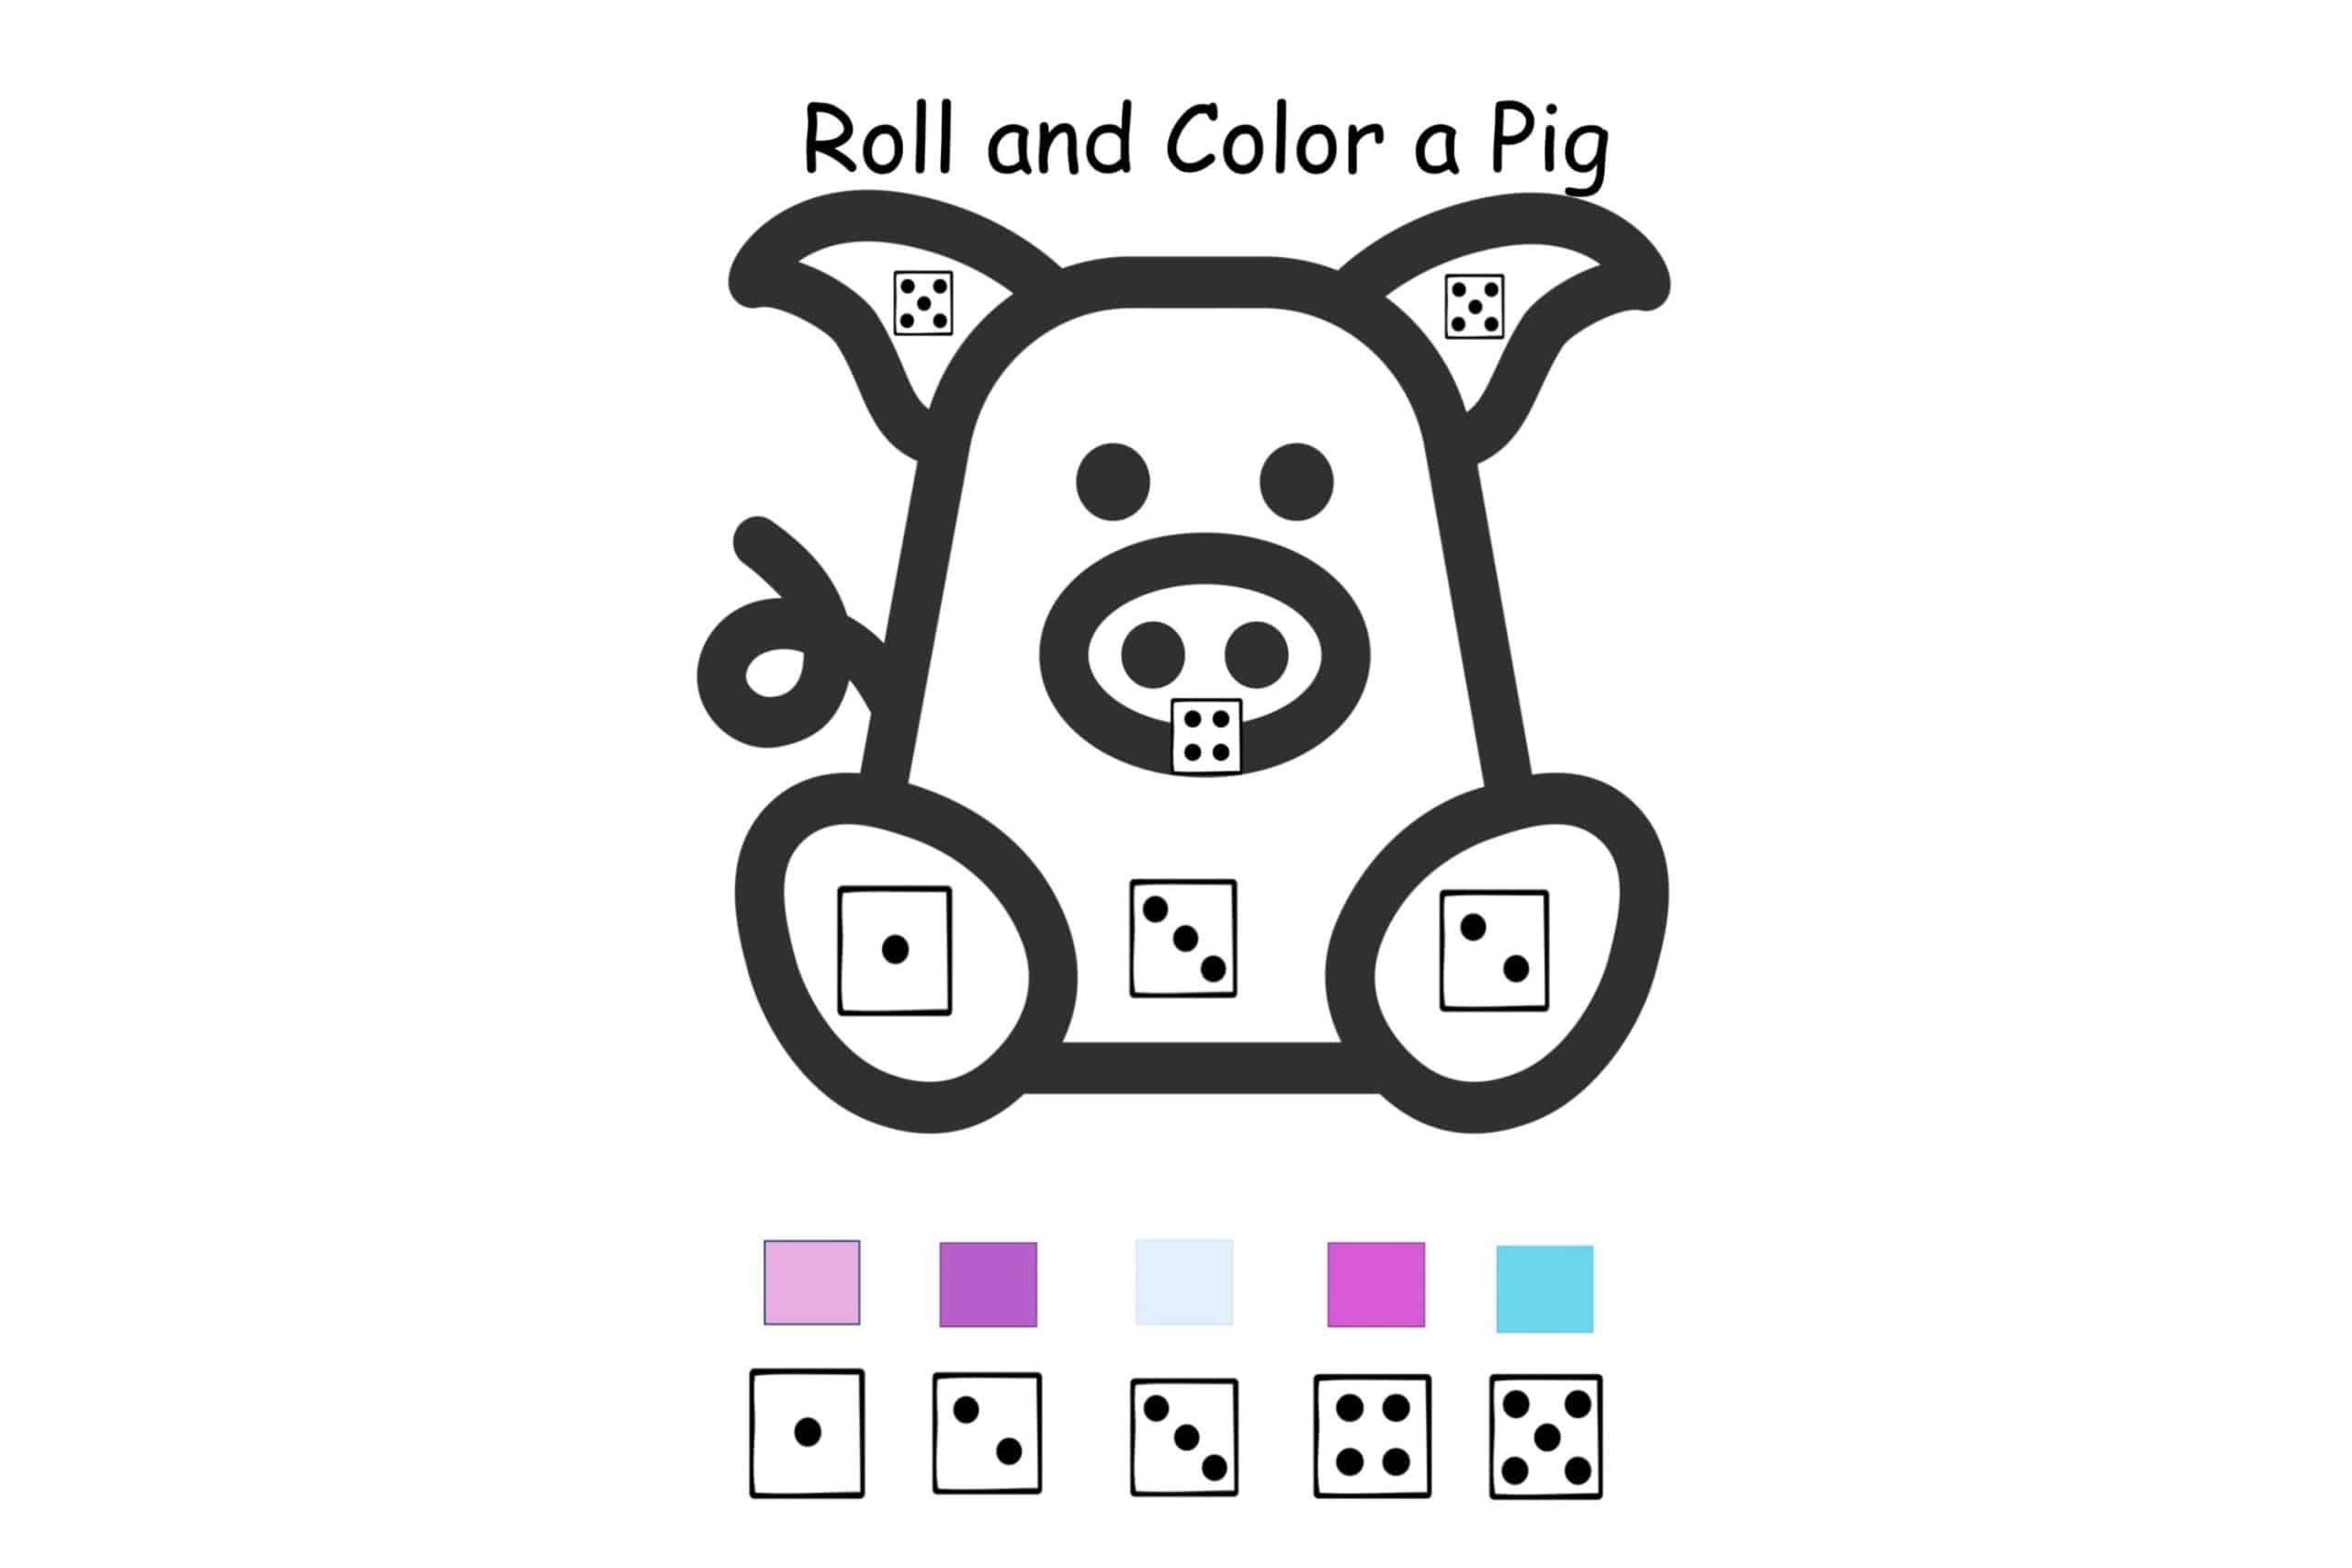 Get Ready to Oink and Roll with ‘Roll and Color a Pig’: A Free Preschool Math Game!